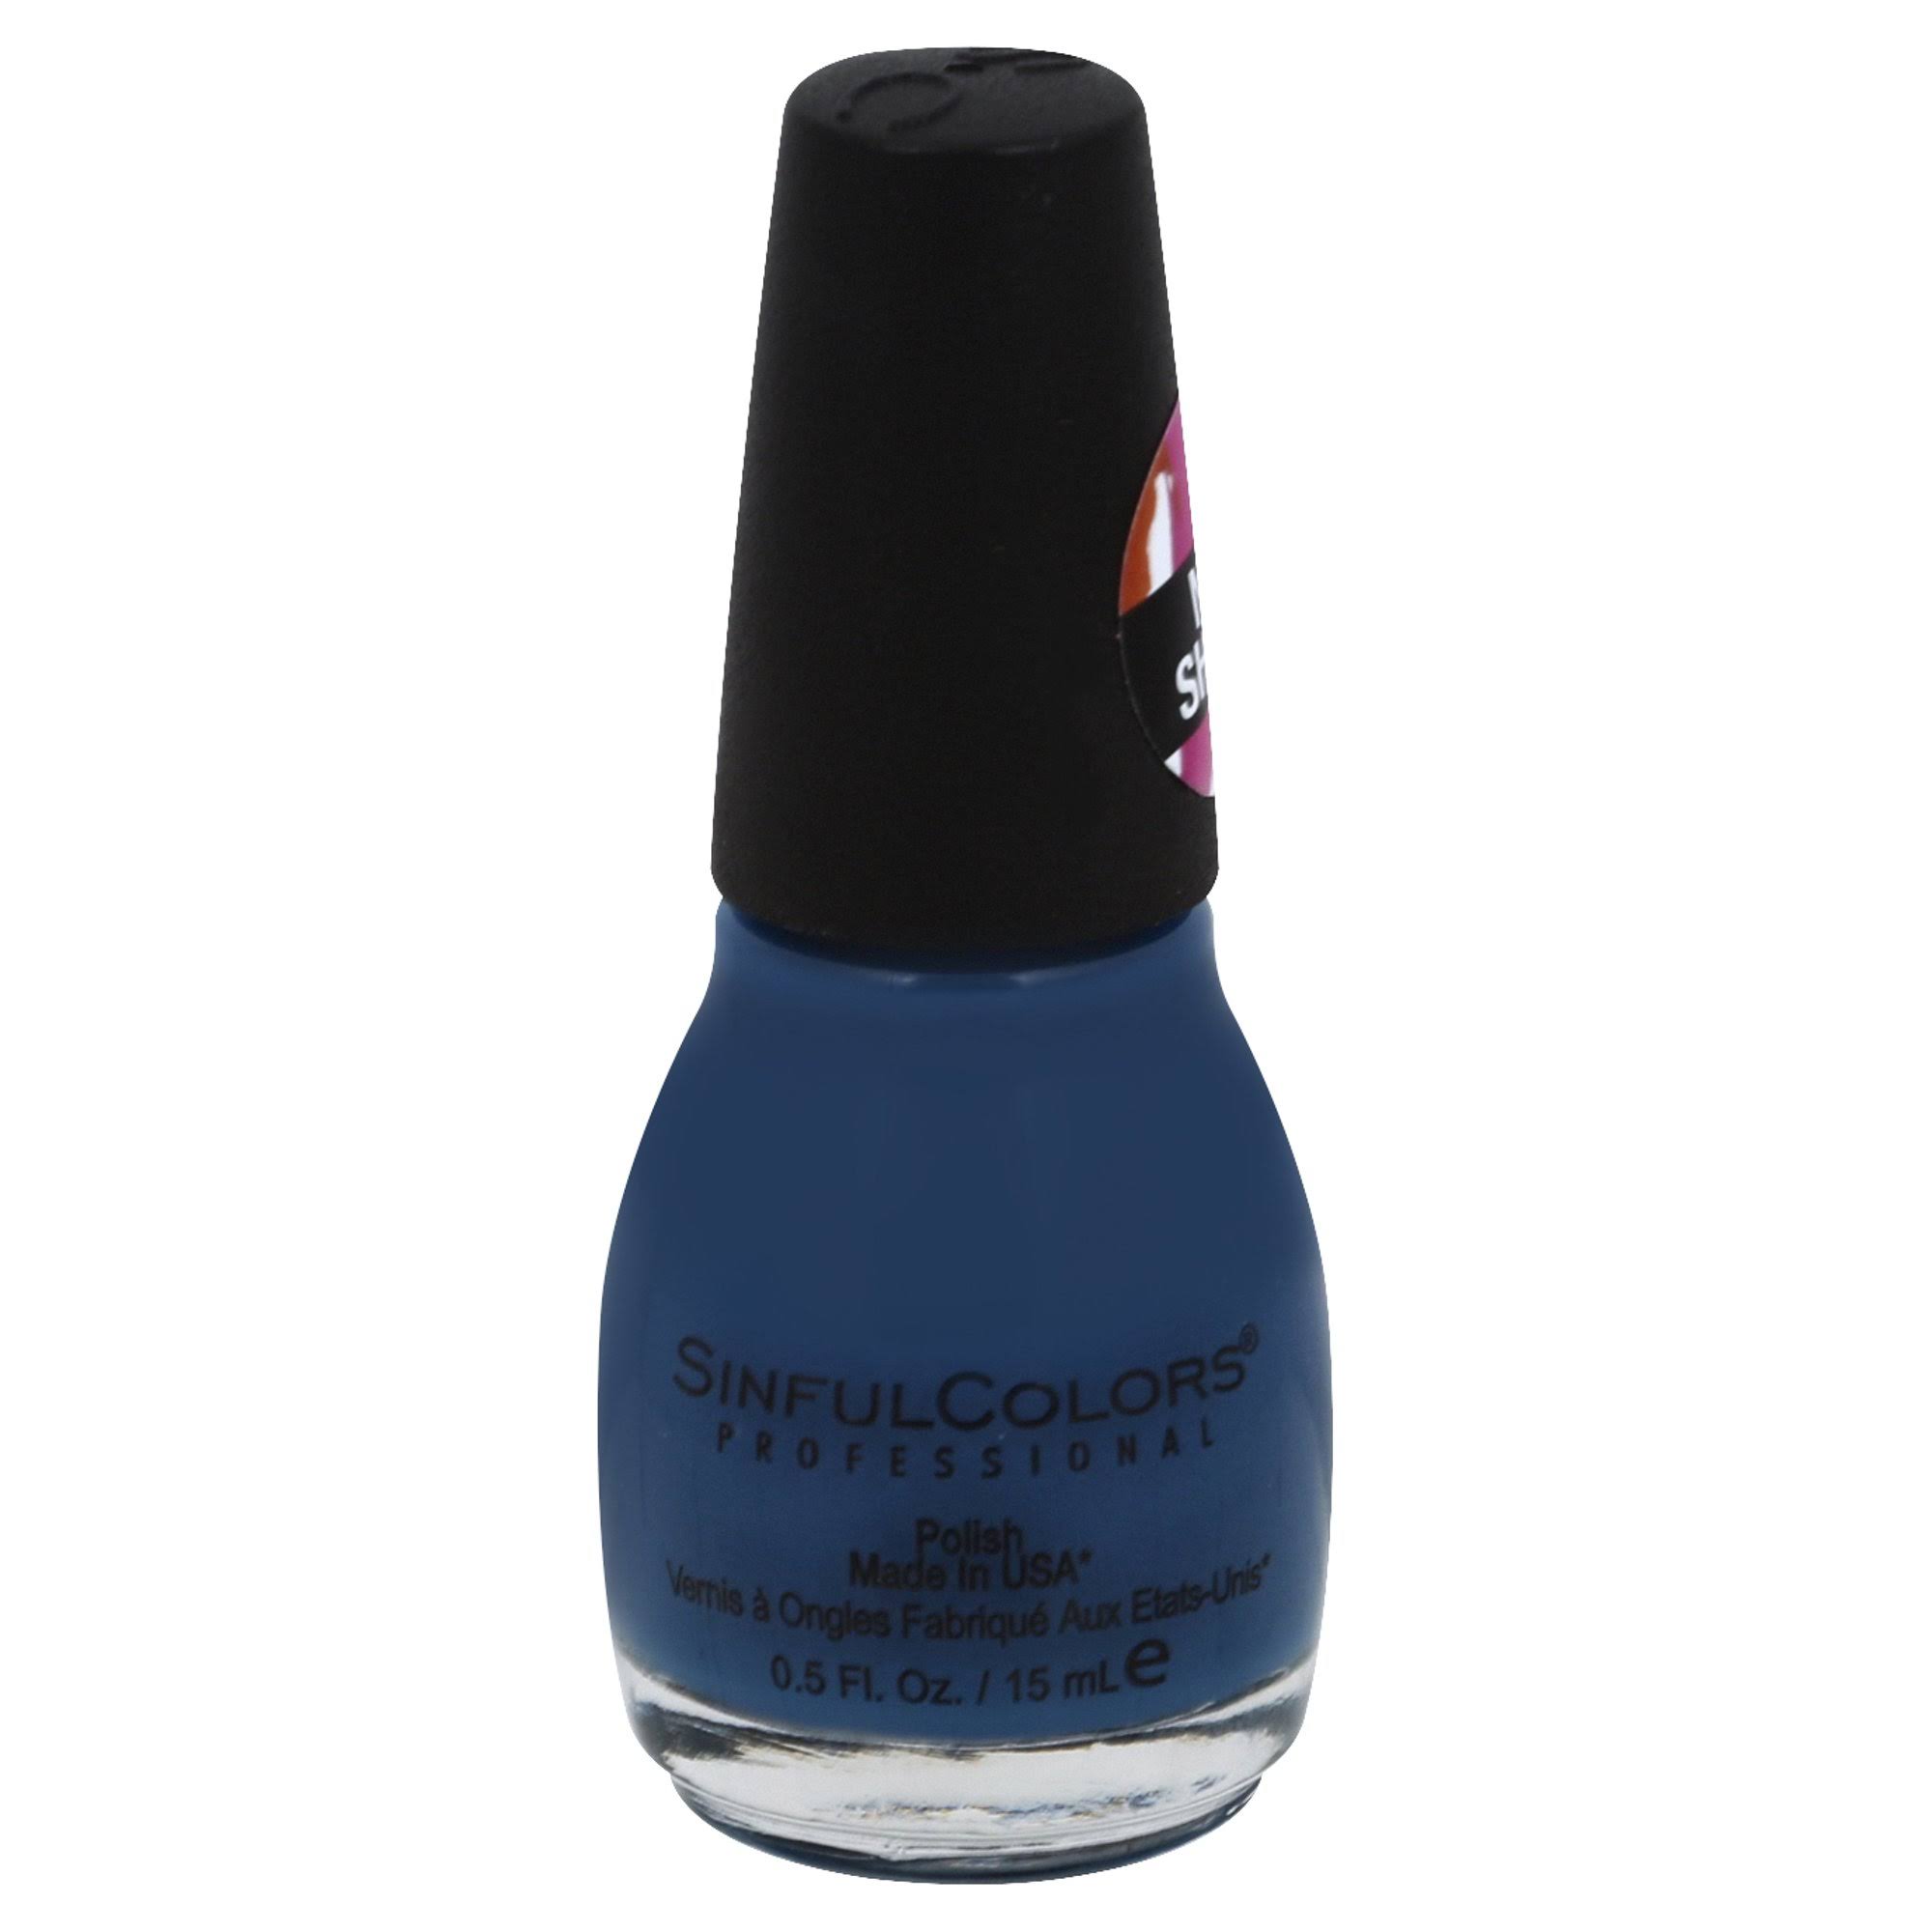 Sinful Colors Professional Nail Polish - Show & Tell